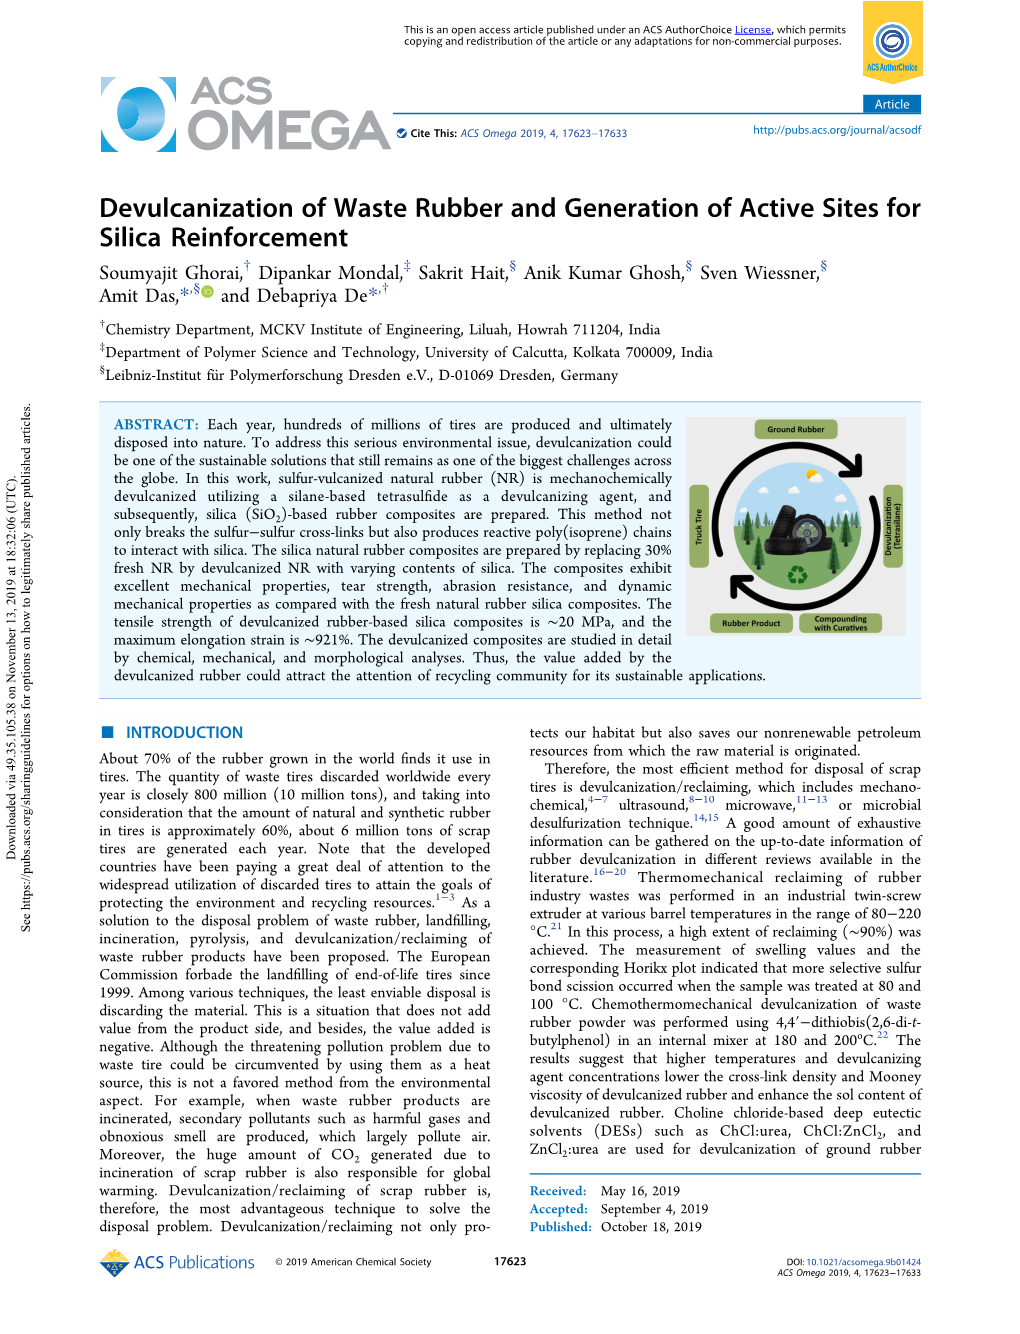 Devulcanization of Waste Rubber and Generation of Active Sites for Silica